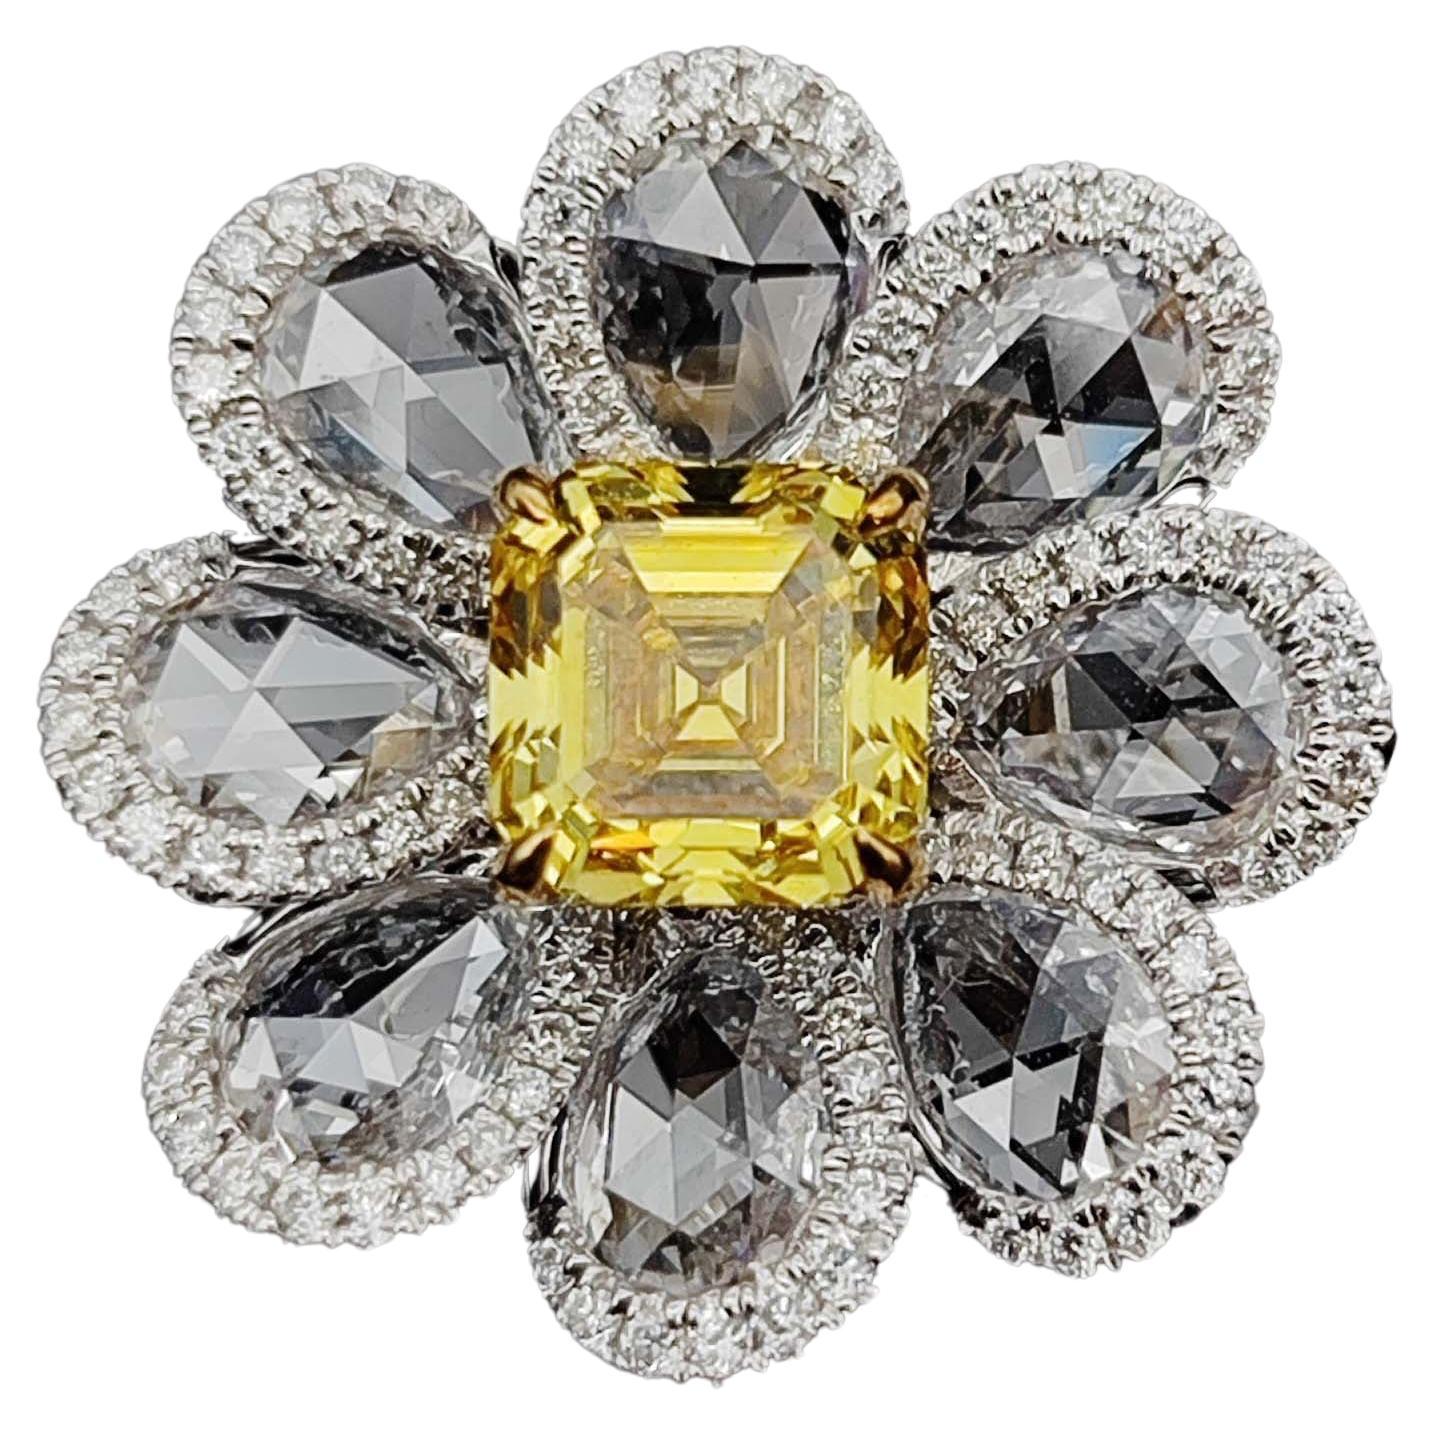 1.04 Carat Fancy Vivid Yellow Diamond Flower Cocktail Ring GIA Report, 18k Gold For Sale